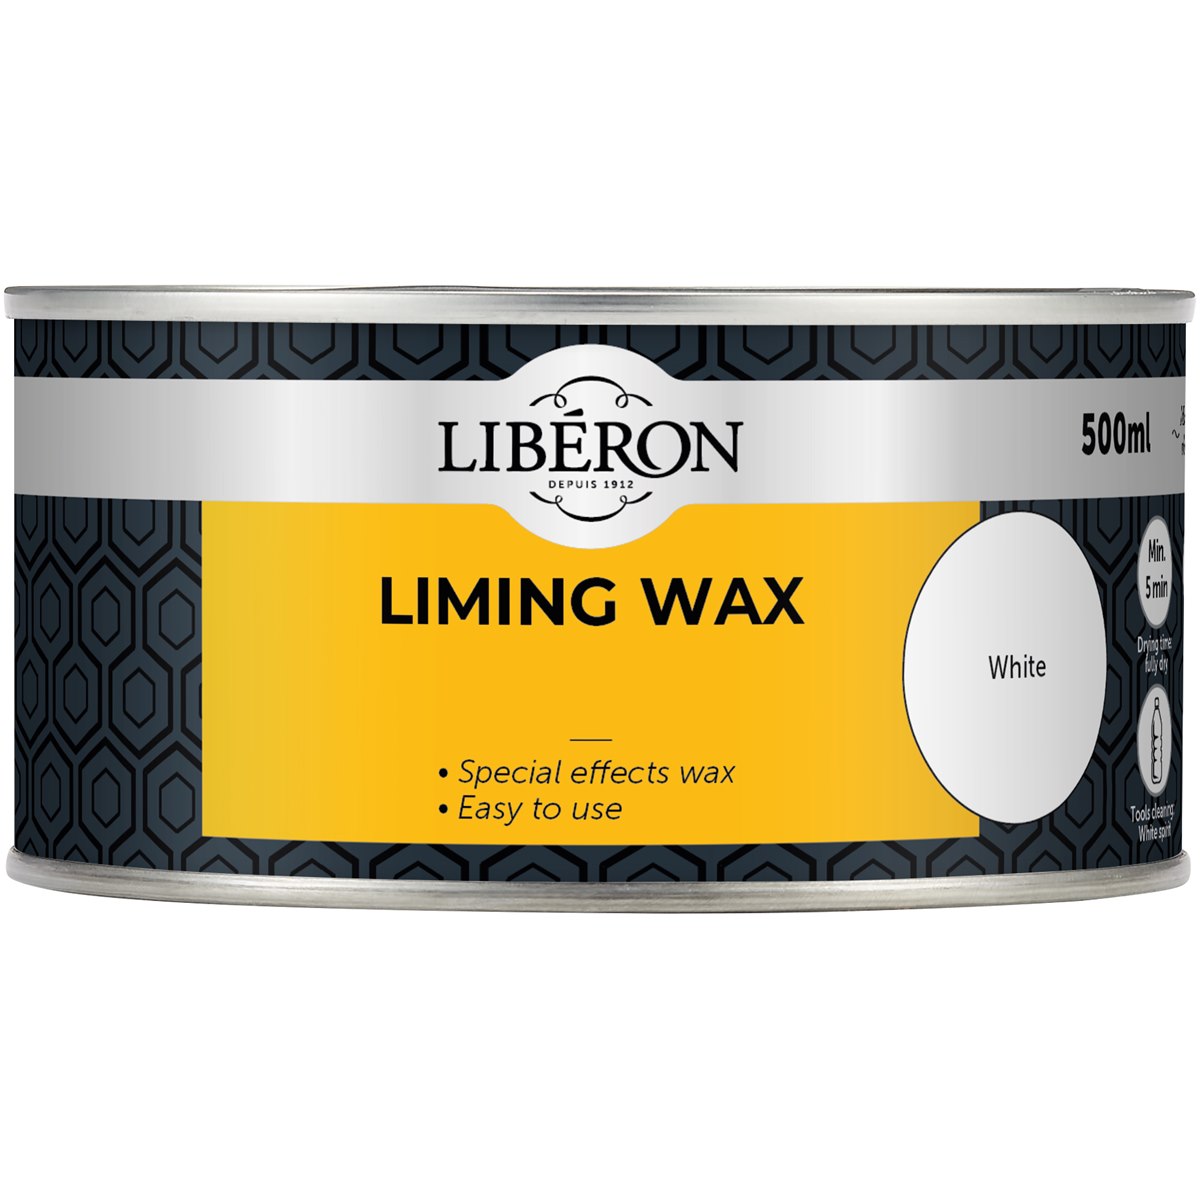 Liberon Special Effects Liming Wax 500ml